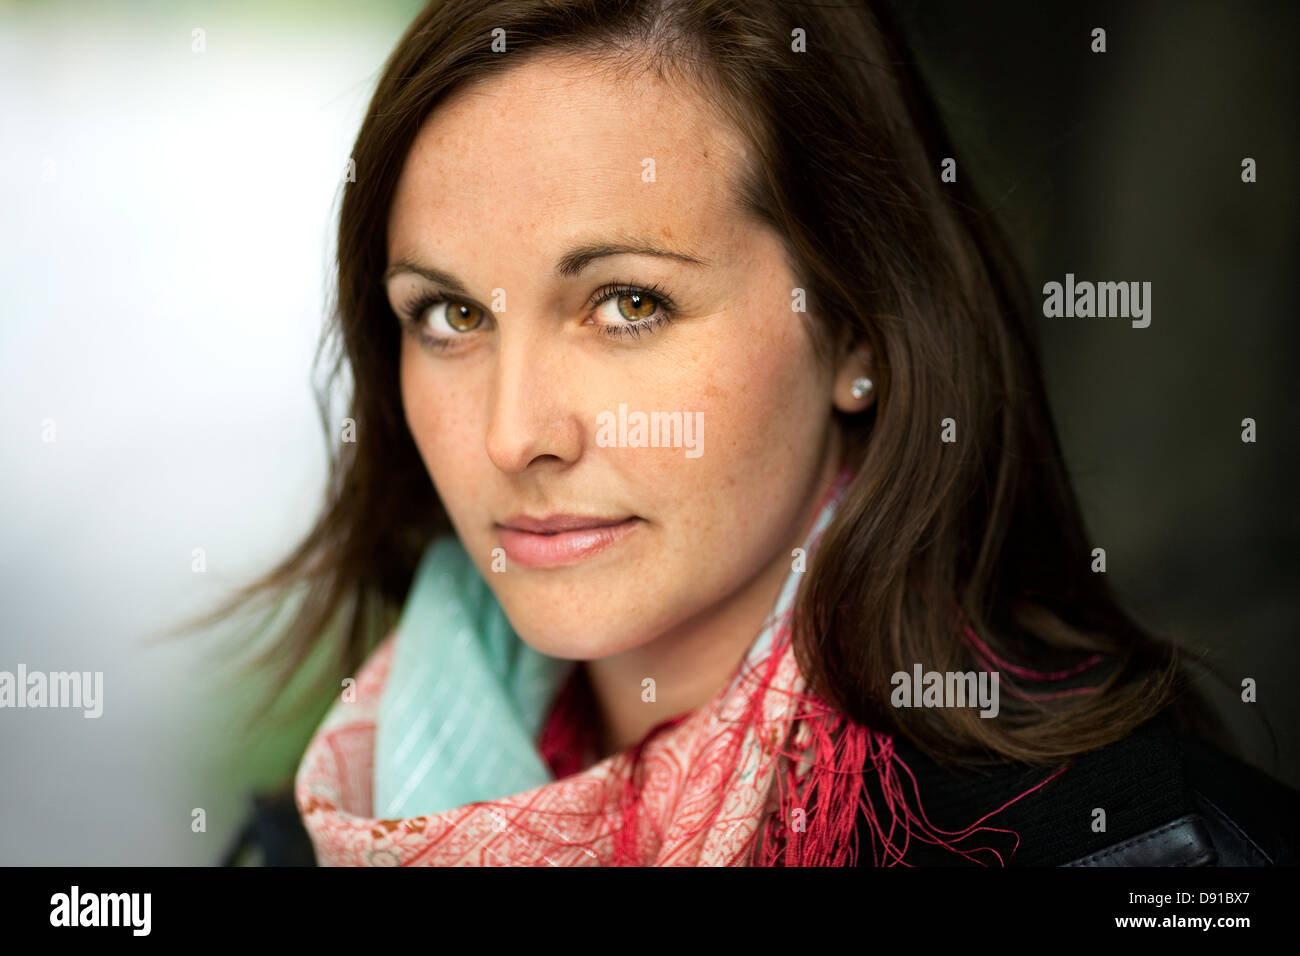 Portrait of a brown-haired woman, Sweden. Stock Photo